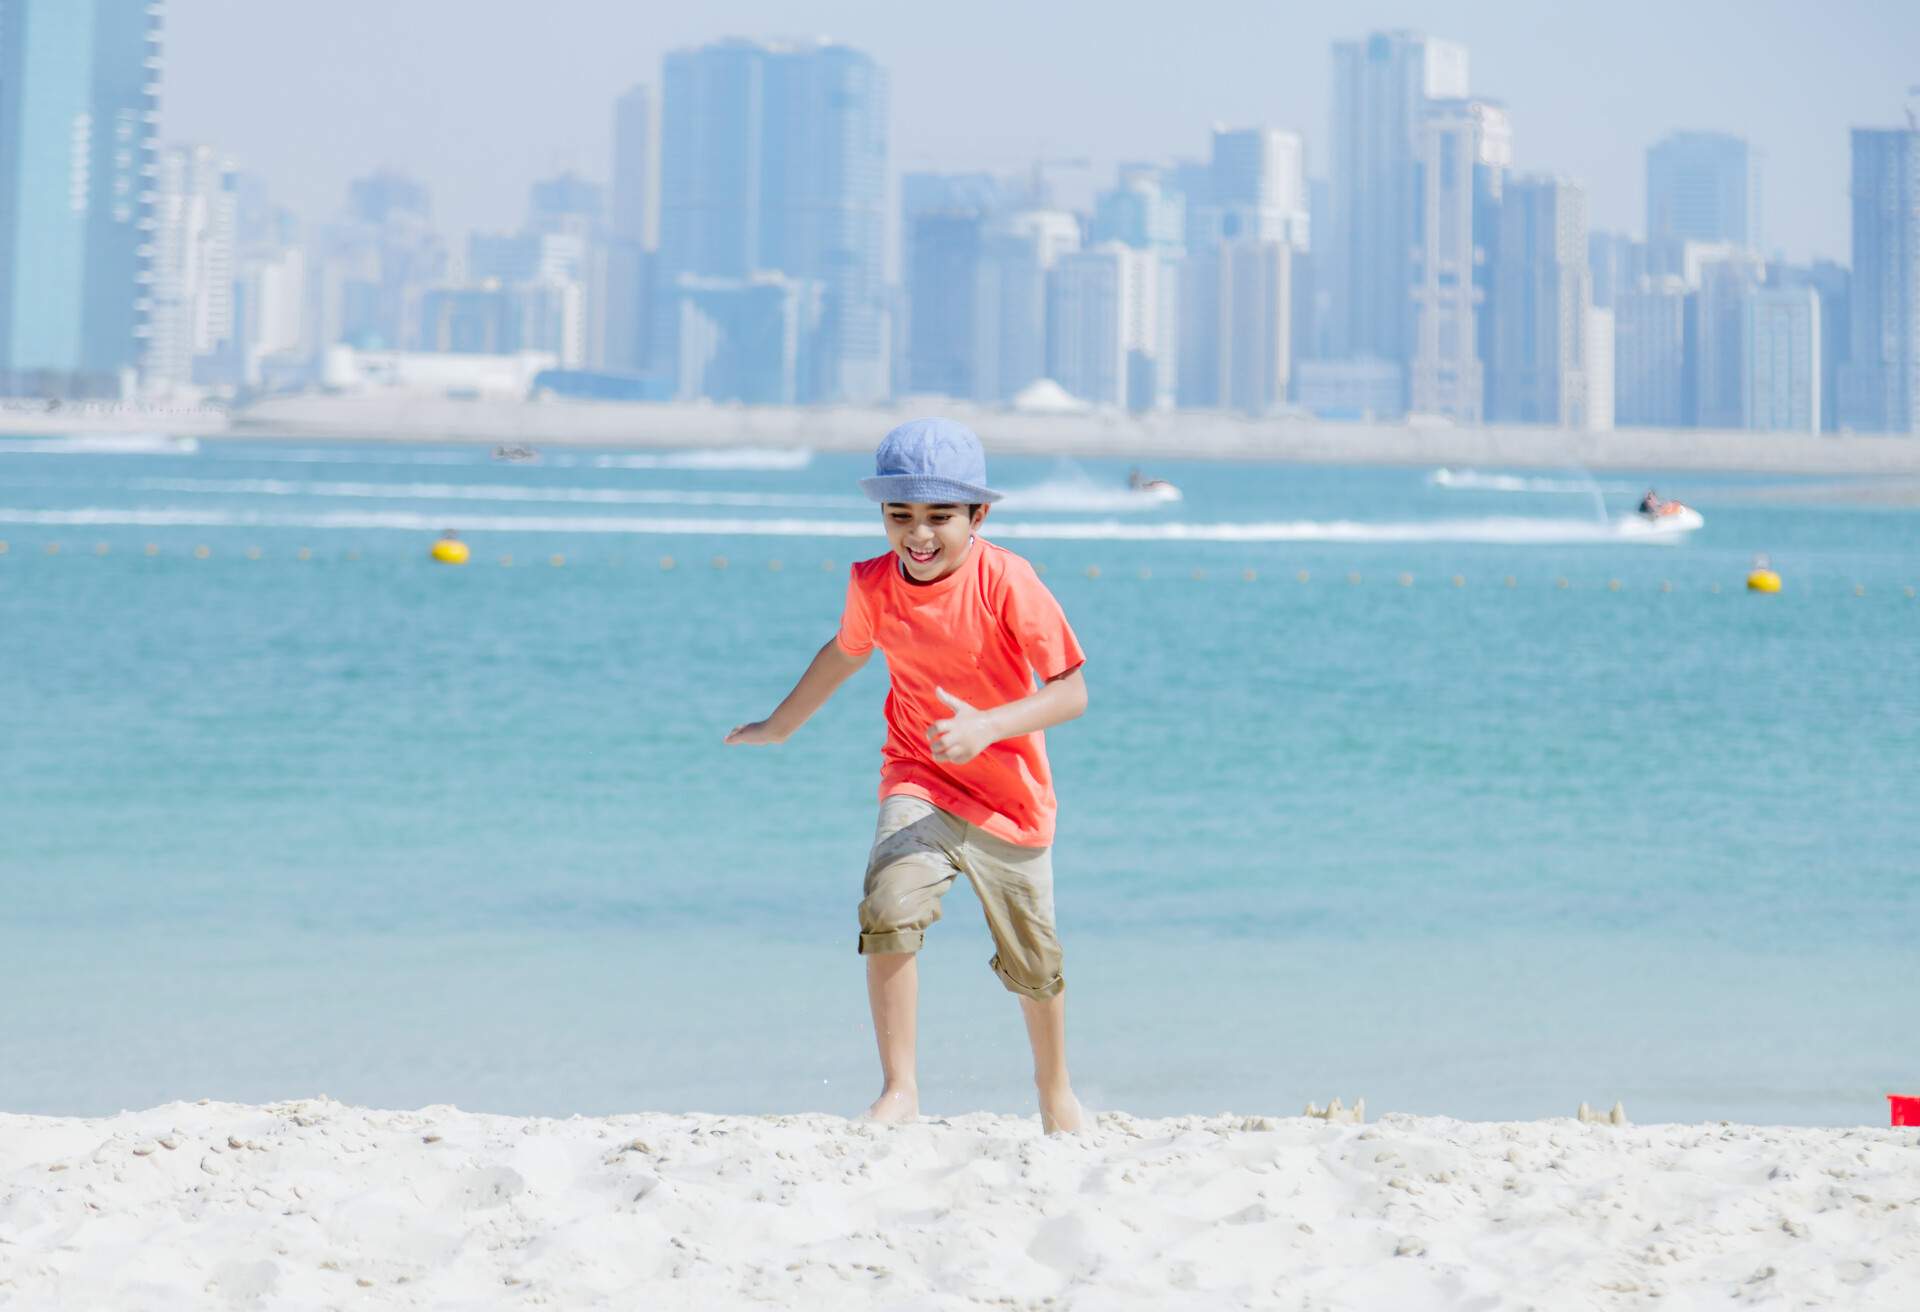 Cheerful middle eastern little boy running and having fun on sandy beach like an airplane